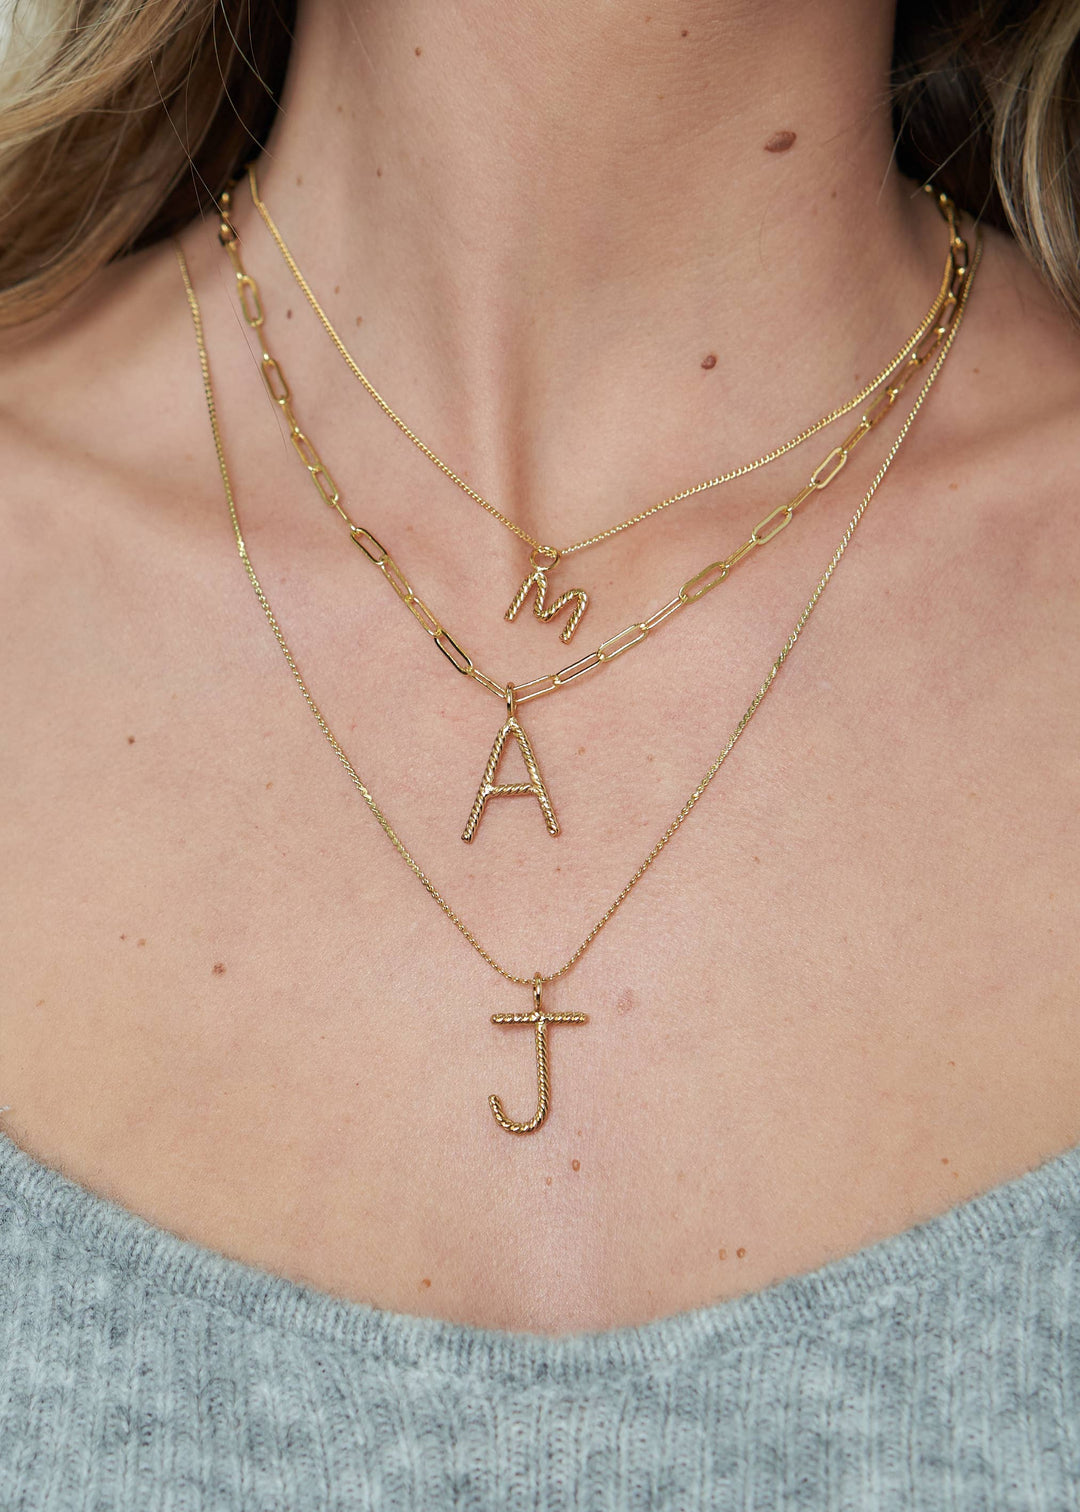 Aspen Initial Mini Necklace: Holiday Favorite: A/ 14"+3"